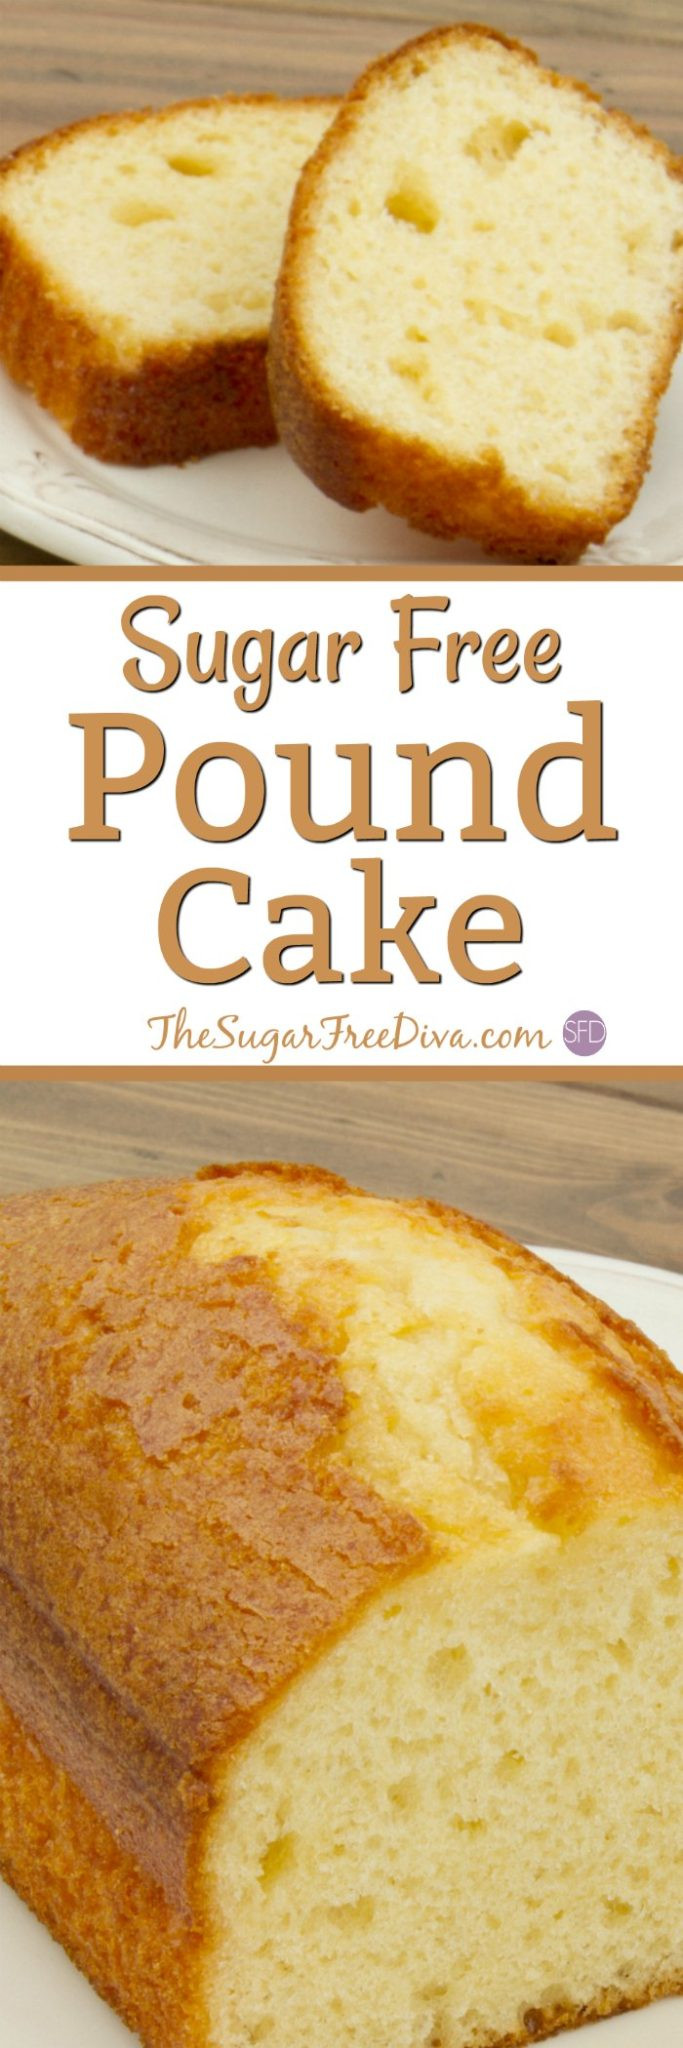 Diabetic Pound Cake
 Check out this recipe for How to Make Sugar Free Pound Cake